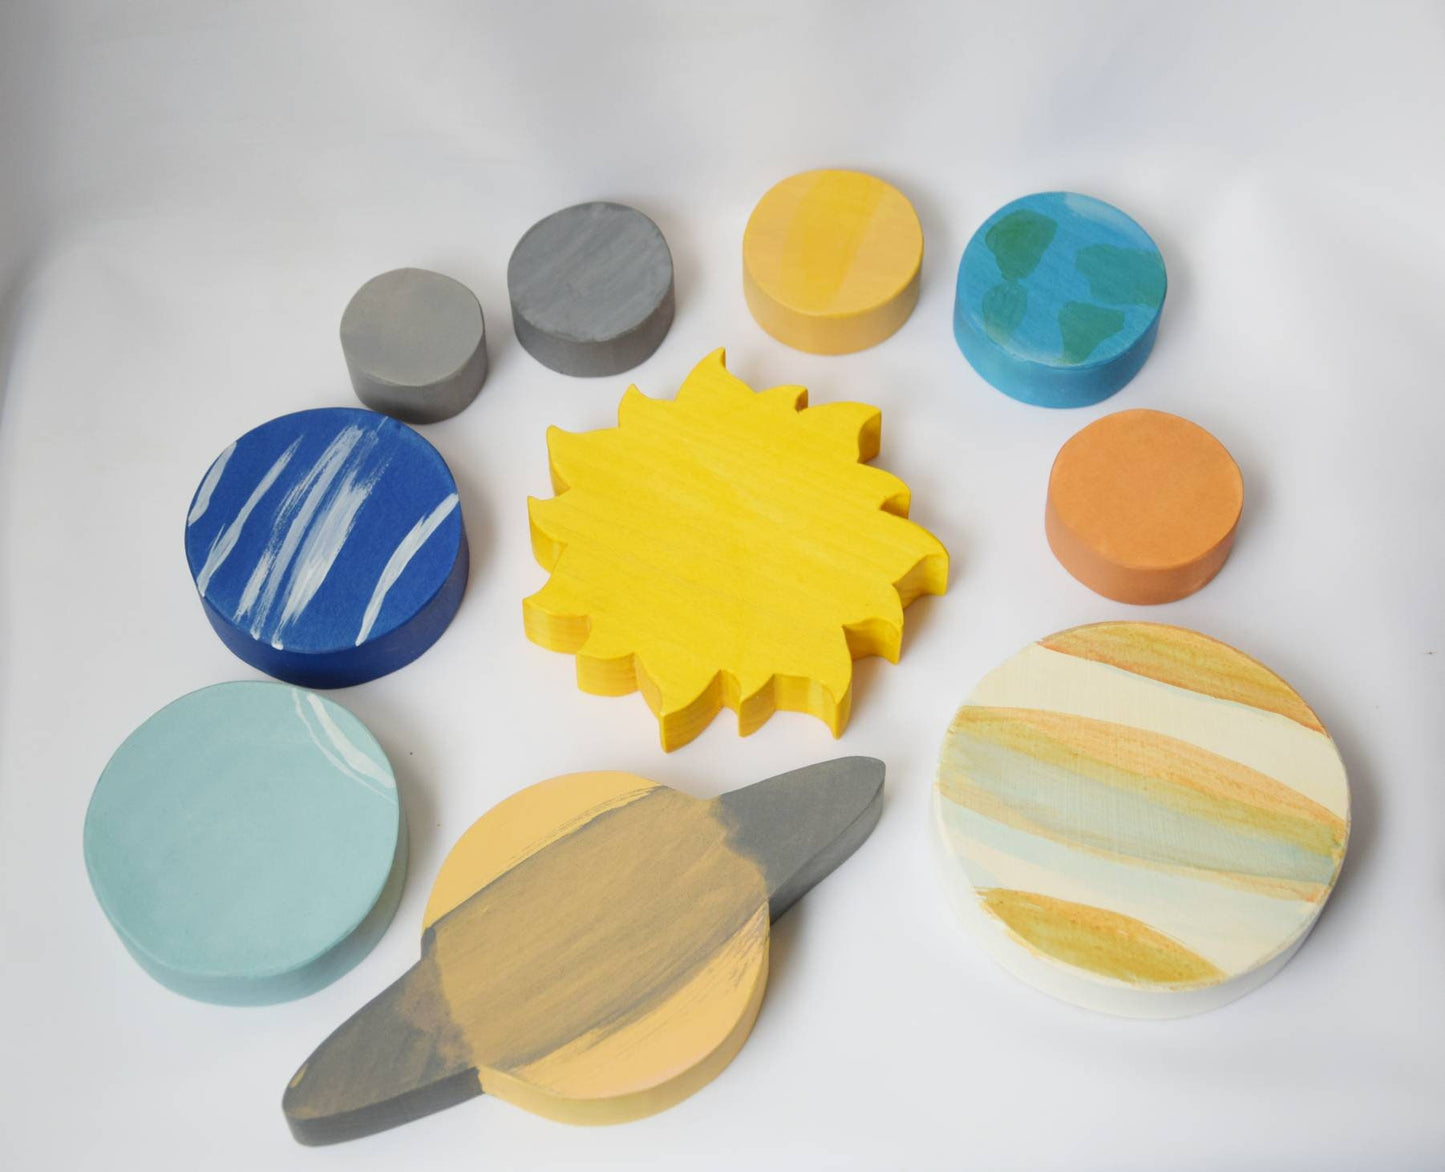 solar system wooden toy set, planets, waldorf inspired, homeschool, montessori, astronomy toy set, gift for kids, christmas present, toy set